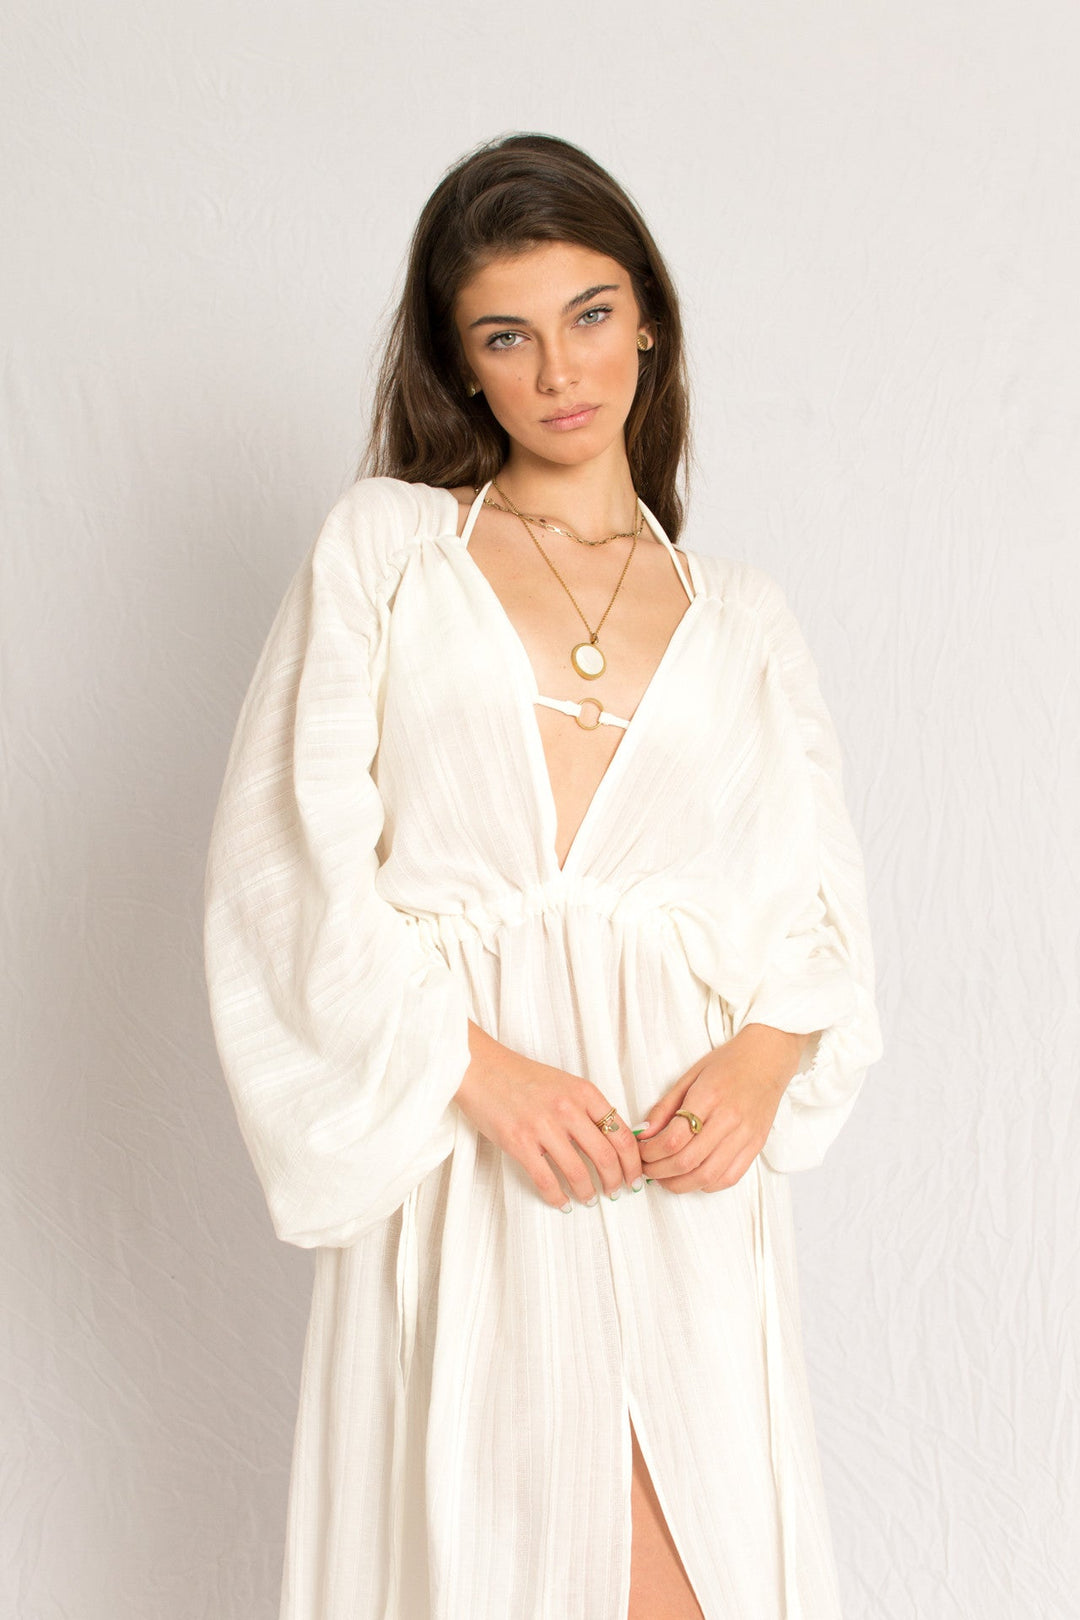 White caftan maxi beach dress with V neckline and middle slit